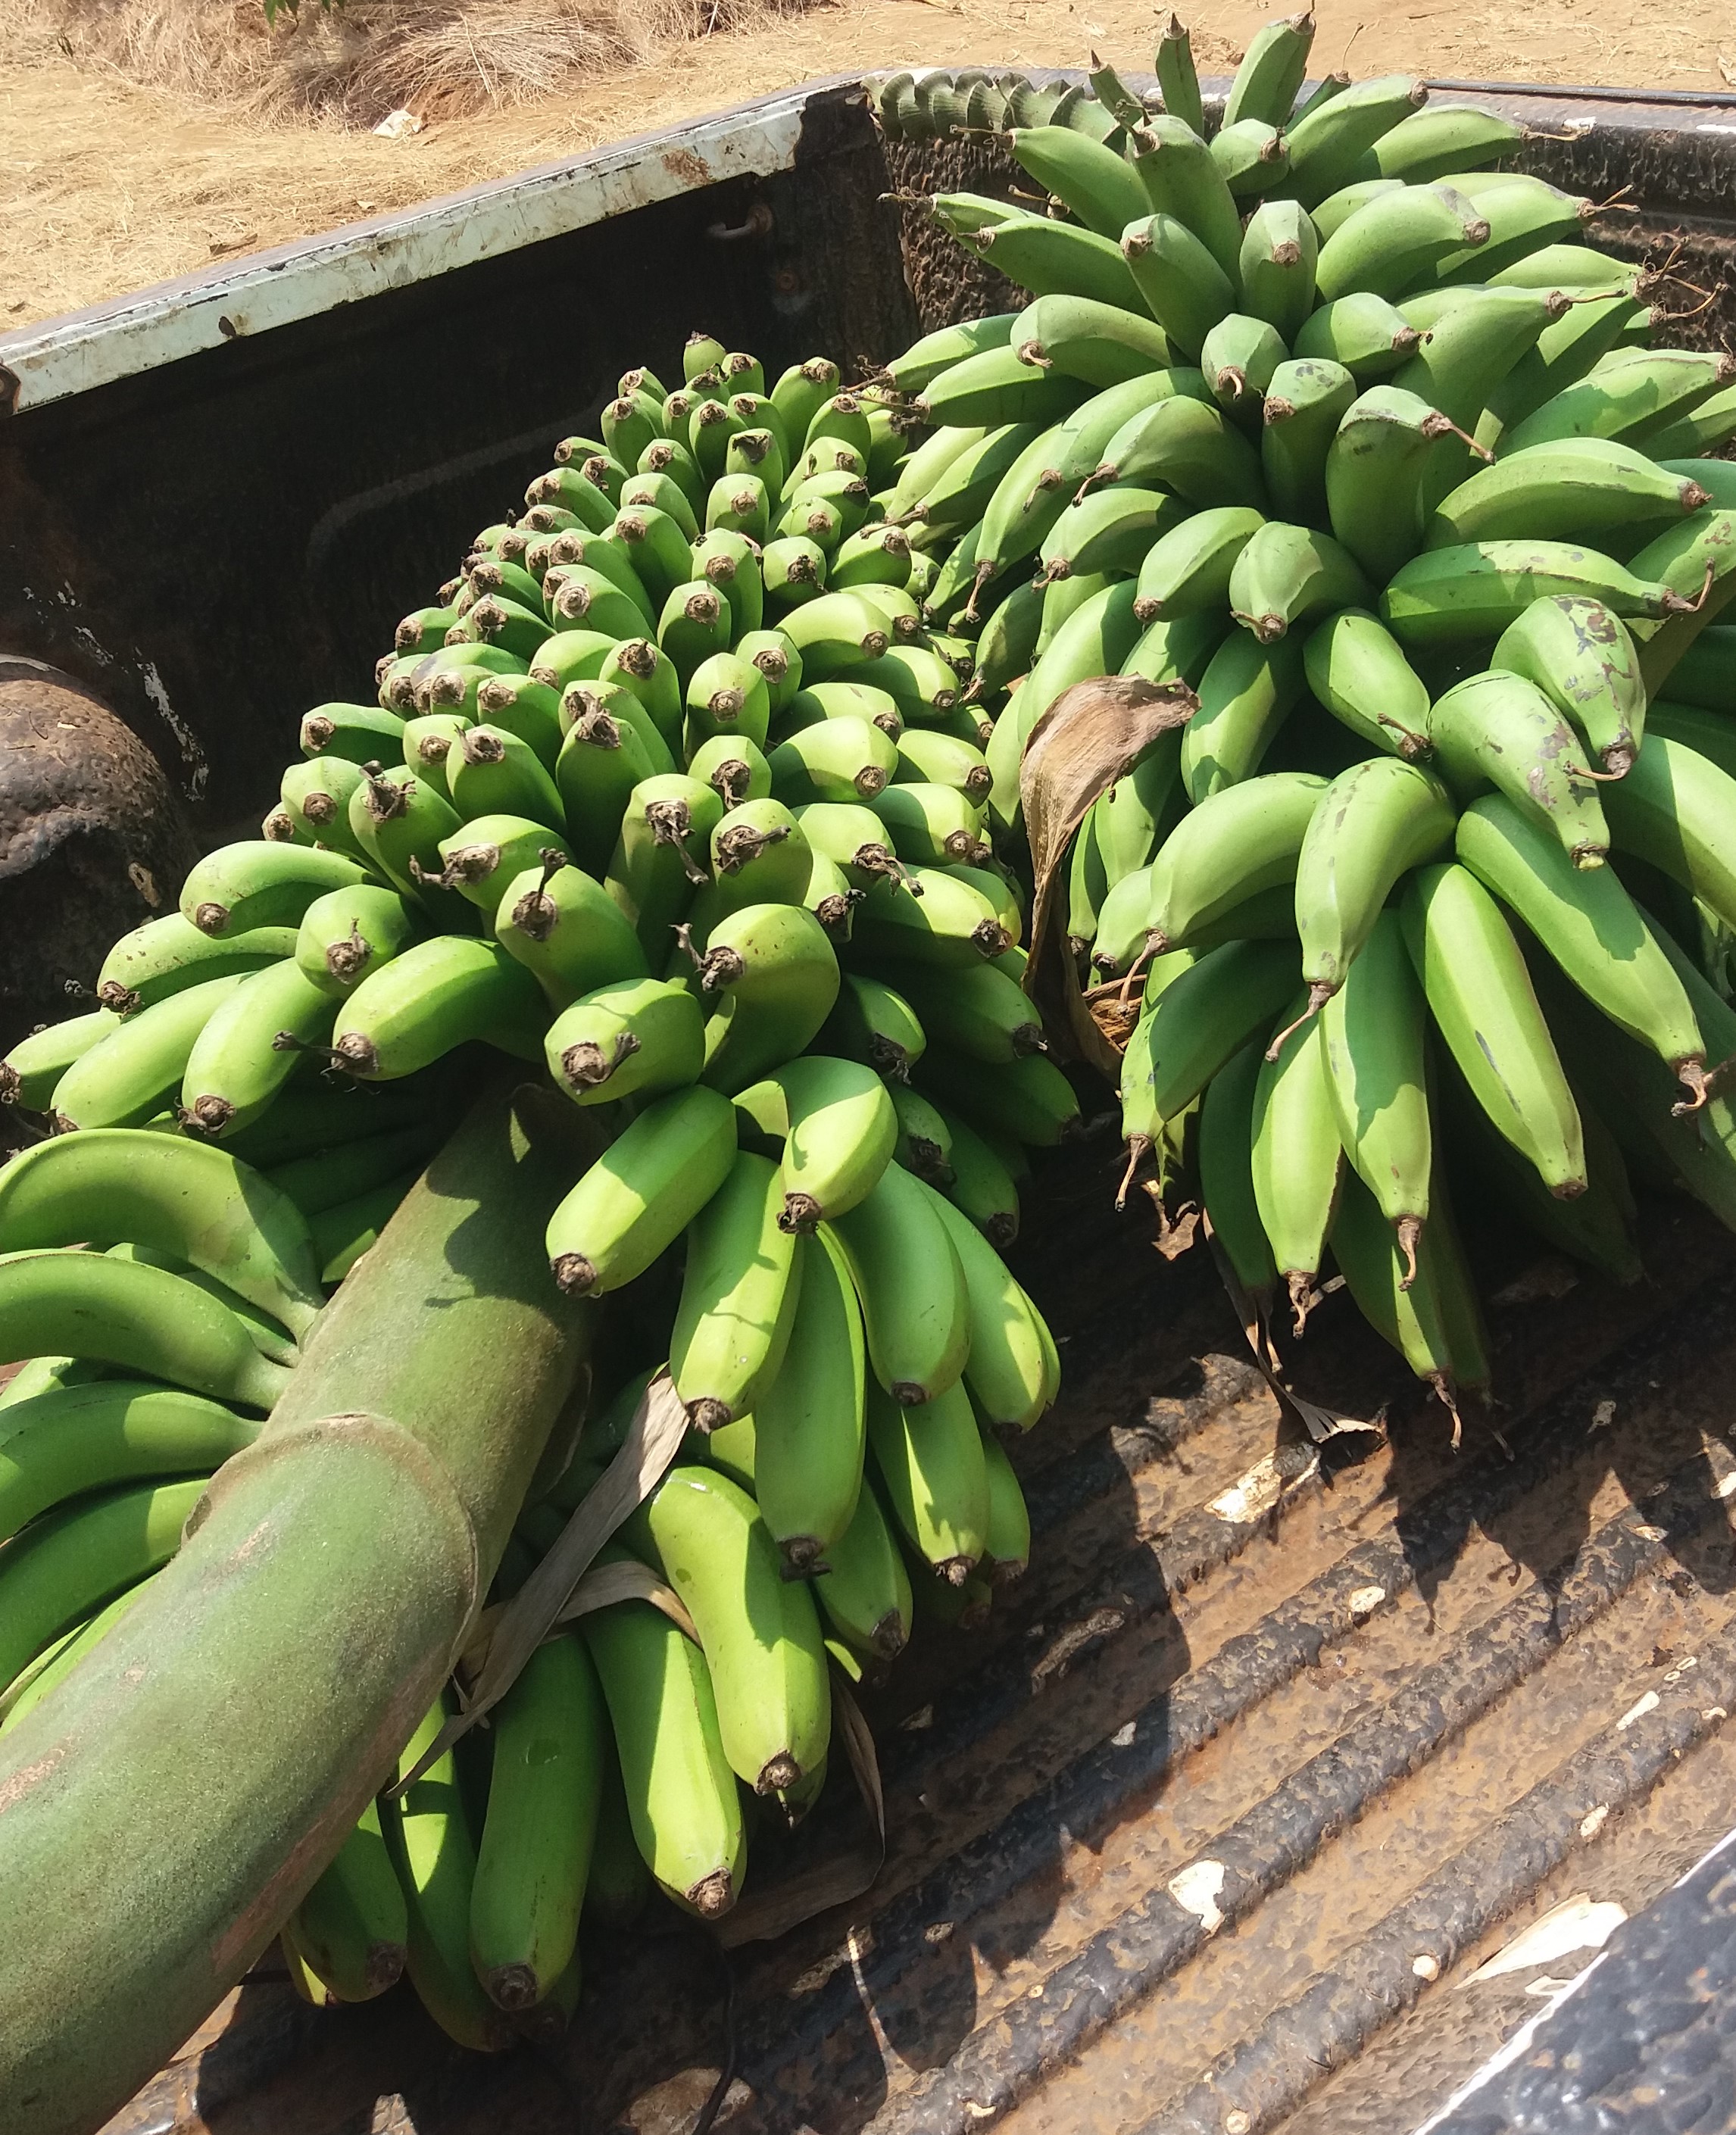 Improving scalable banana agronomy for smallscale farmers in highland banana cropping system in East Africa (Banana Agronomy Project)